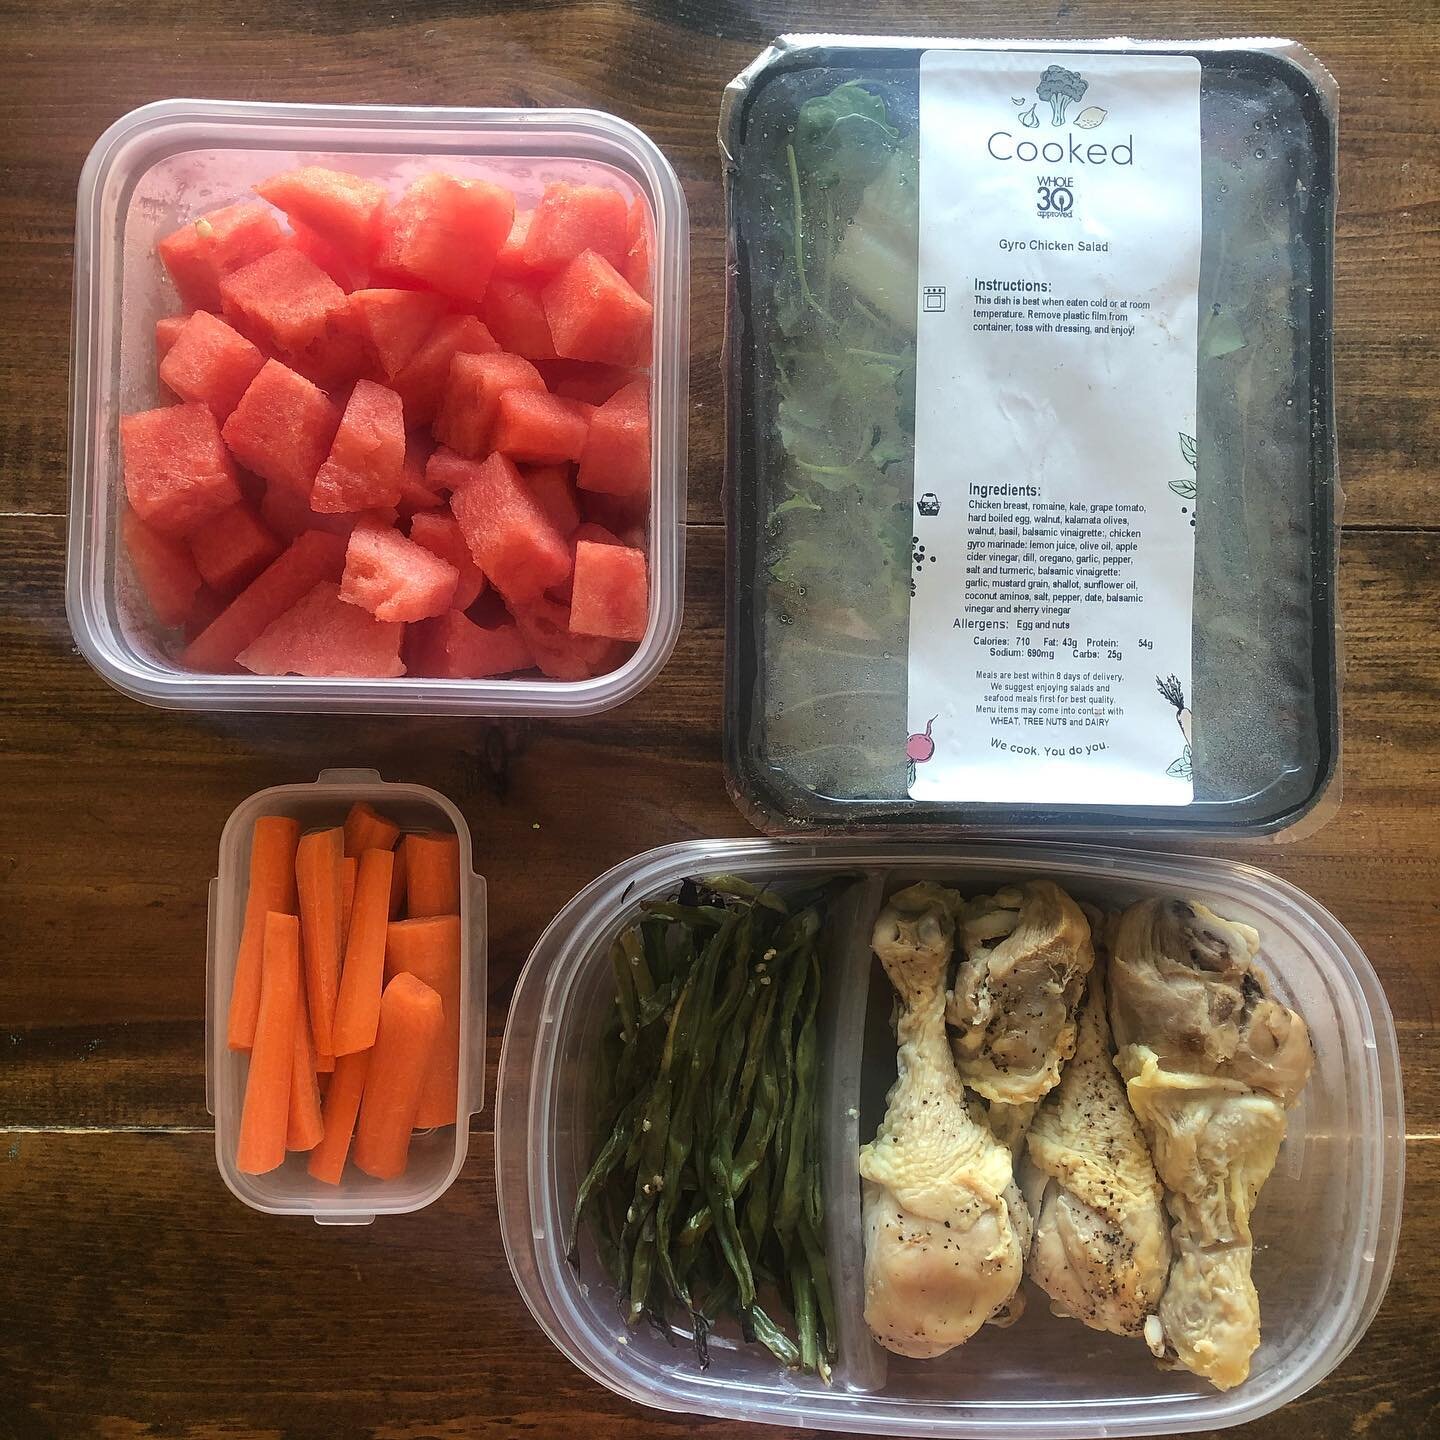 Today we packed a cooler and headed to the creek! 
- cold chicken drumsticks
- cold roasted green beans
- carrots
- watermelon 
- @eatcooked salad for ME!
- plantain chips and guacamole (not pictured)
.
Fruit and raw veggies are the easy part of picn